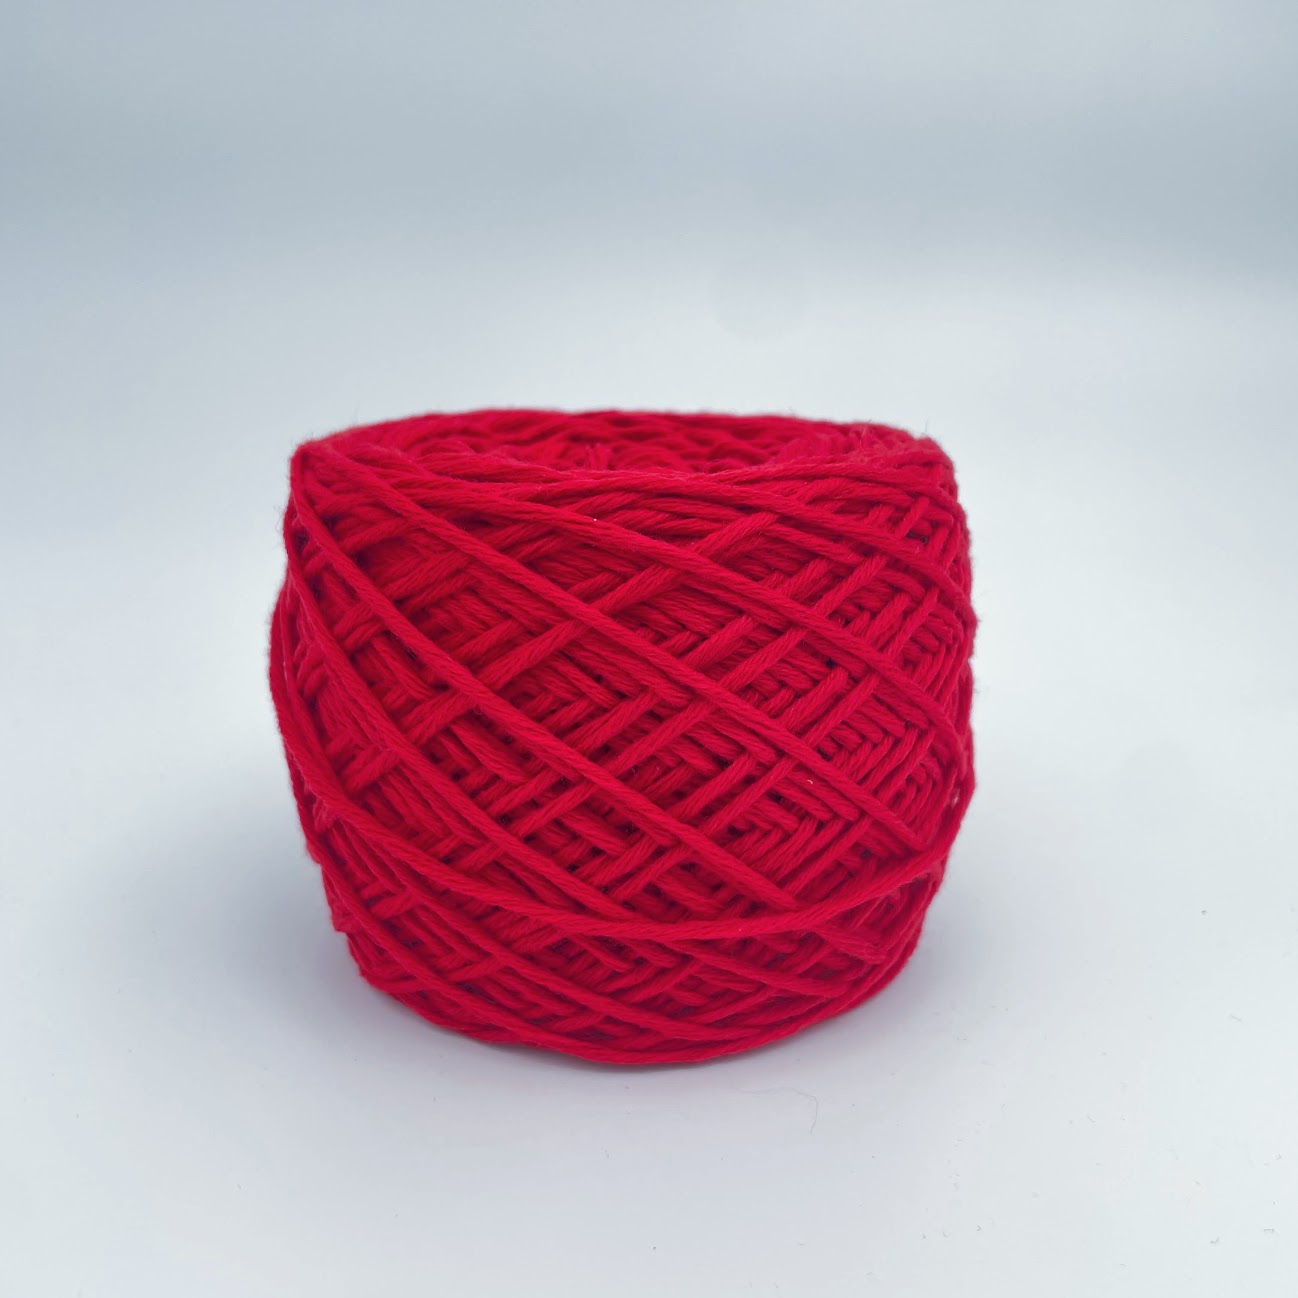 100% Cashmere Yarn - Deadstock Yarn - Made in Italy - Red - Aran Weight  - 100g